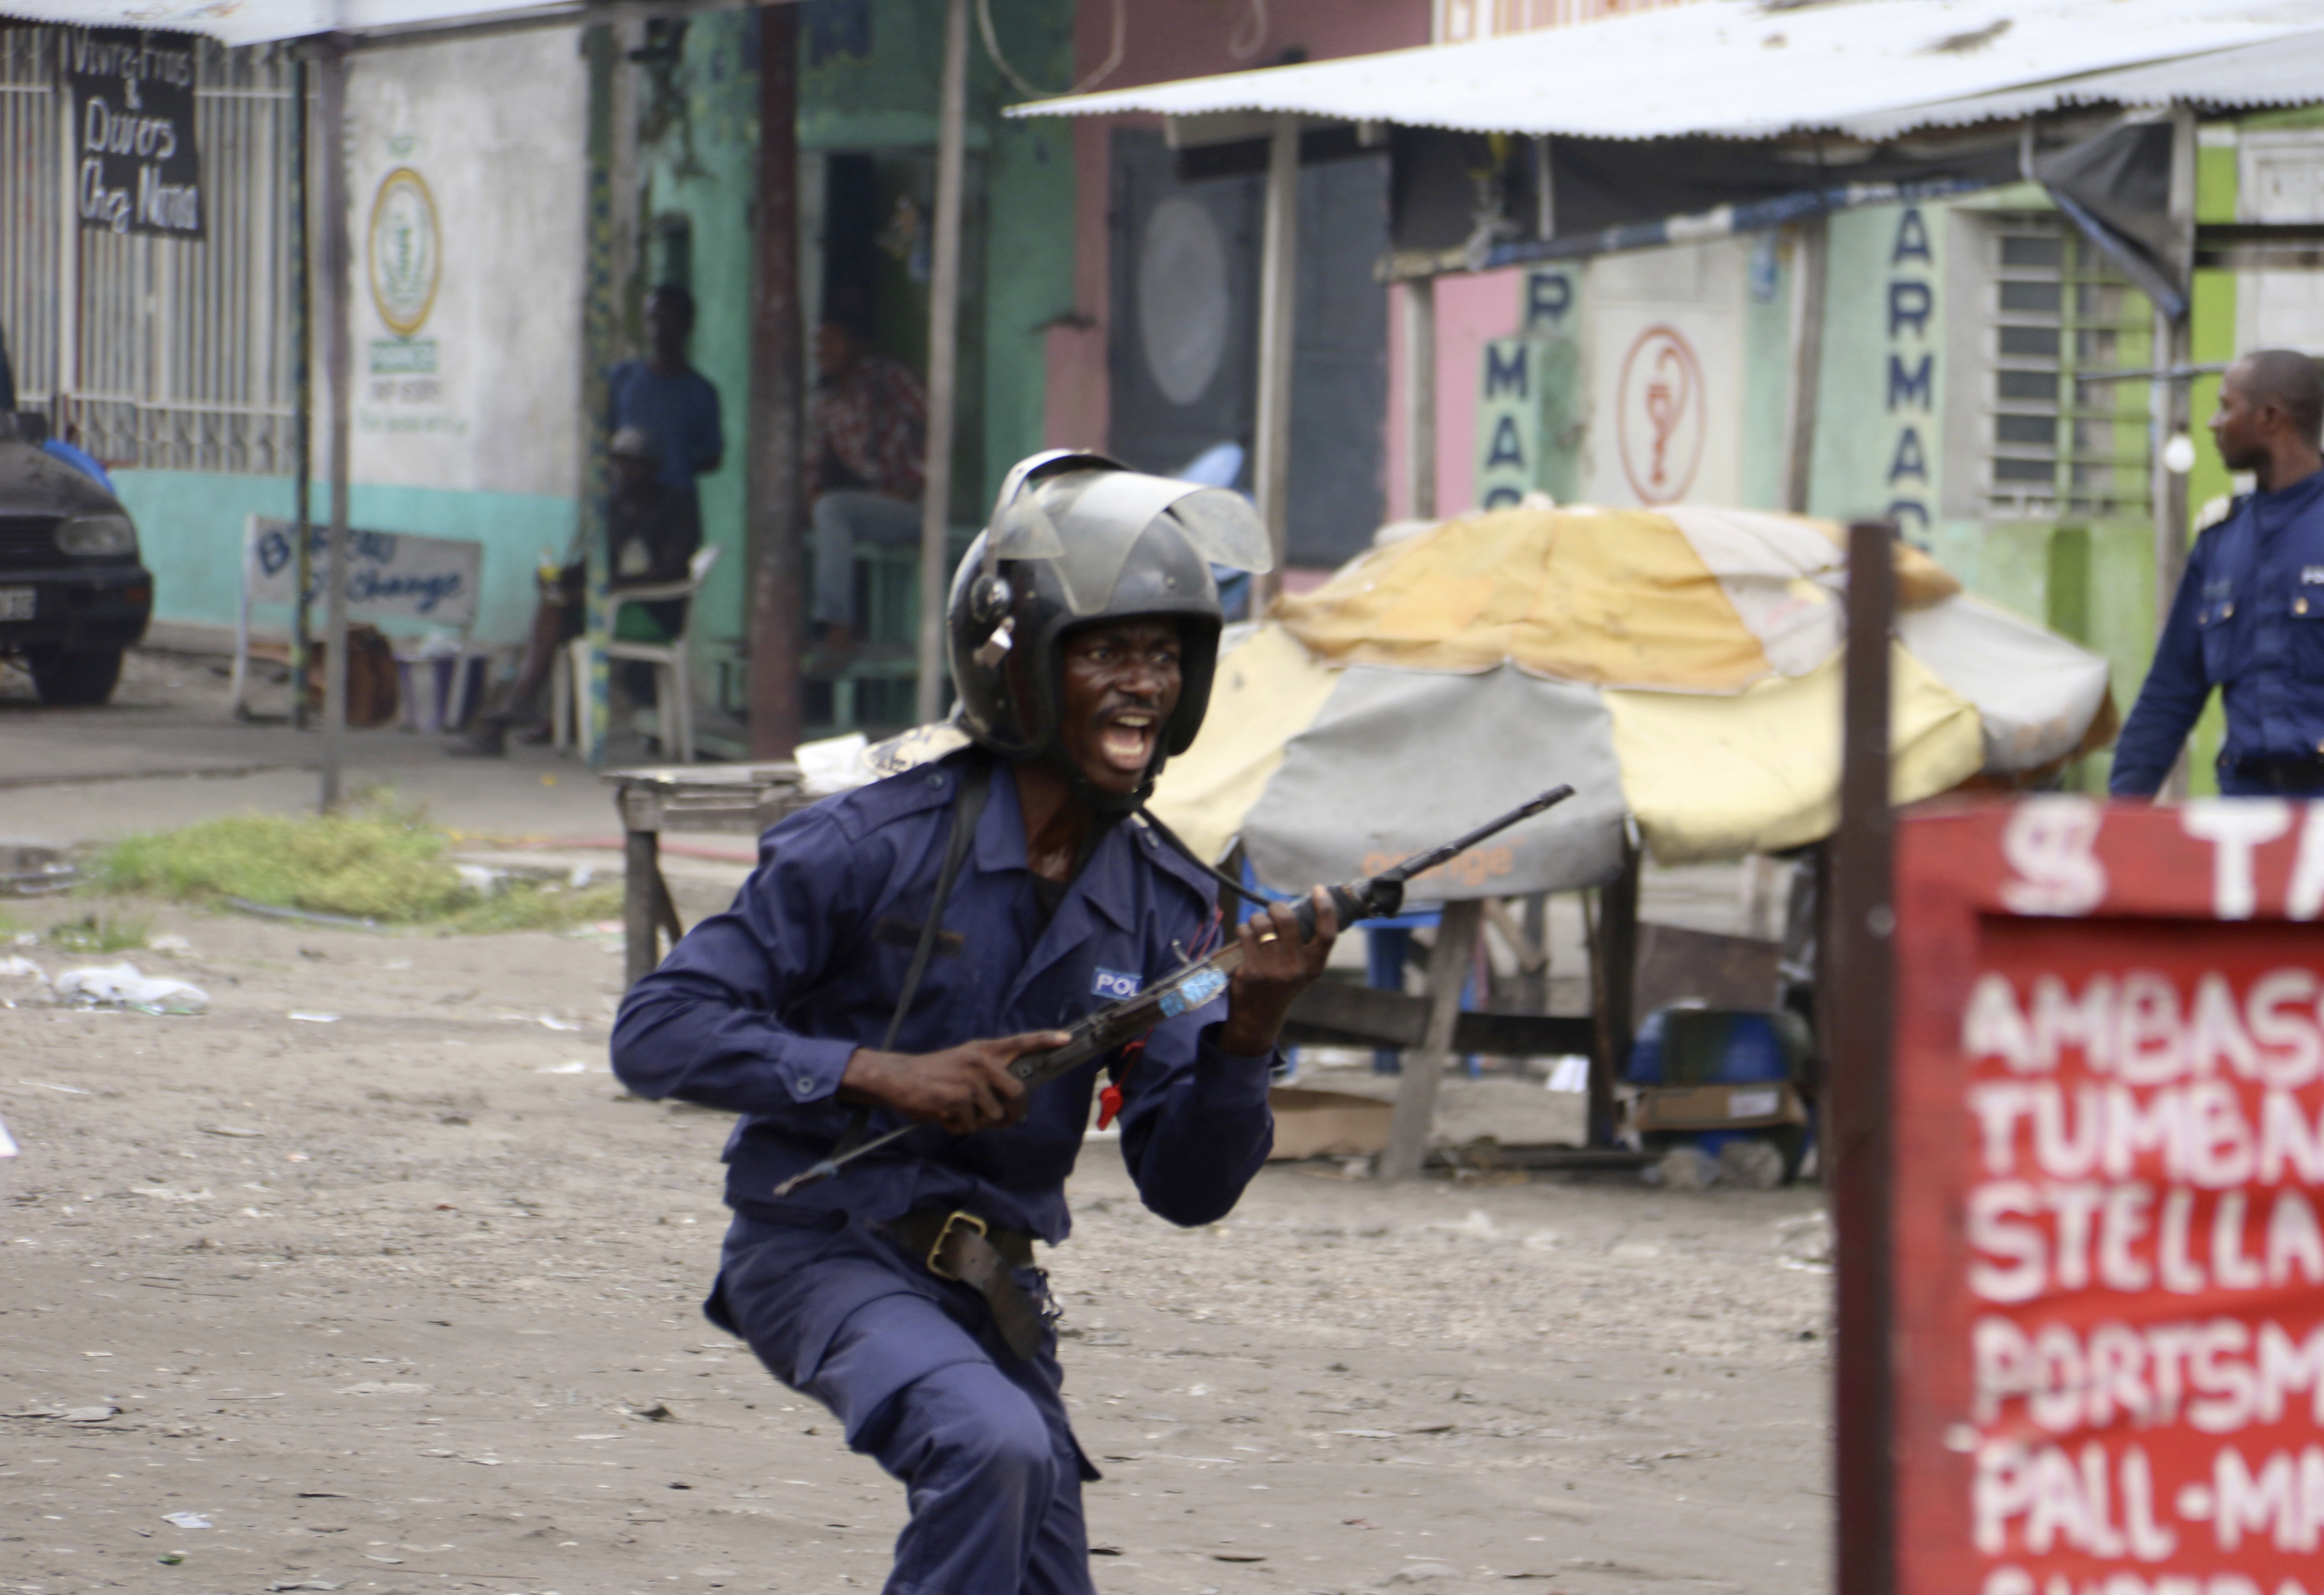 A member of the Congolese security forces chases people during a protest in Kinshasa, Democratic Republic of Congo, Sunday, Dec. 31, 2017. Congolese security forces shot dead two men outside a church on Sunday while dispersing demonstrators protesting in the country's capital against President Joseph Kabila's refusal to step down from power, according to Human Rights Watch. (AP Photo/John Bompengo)